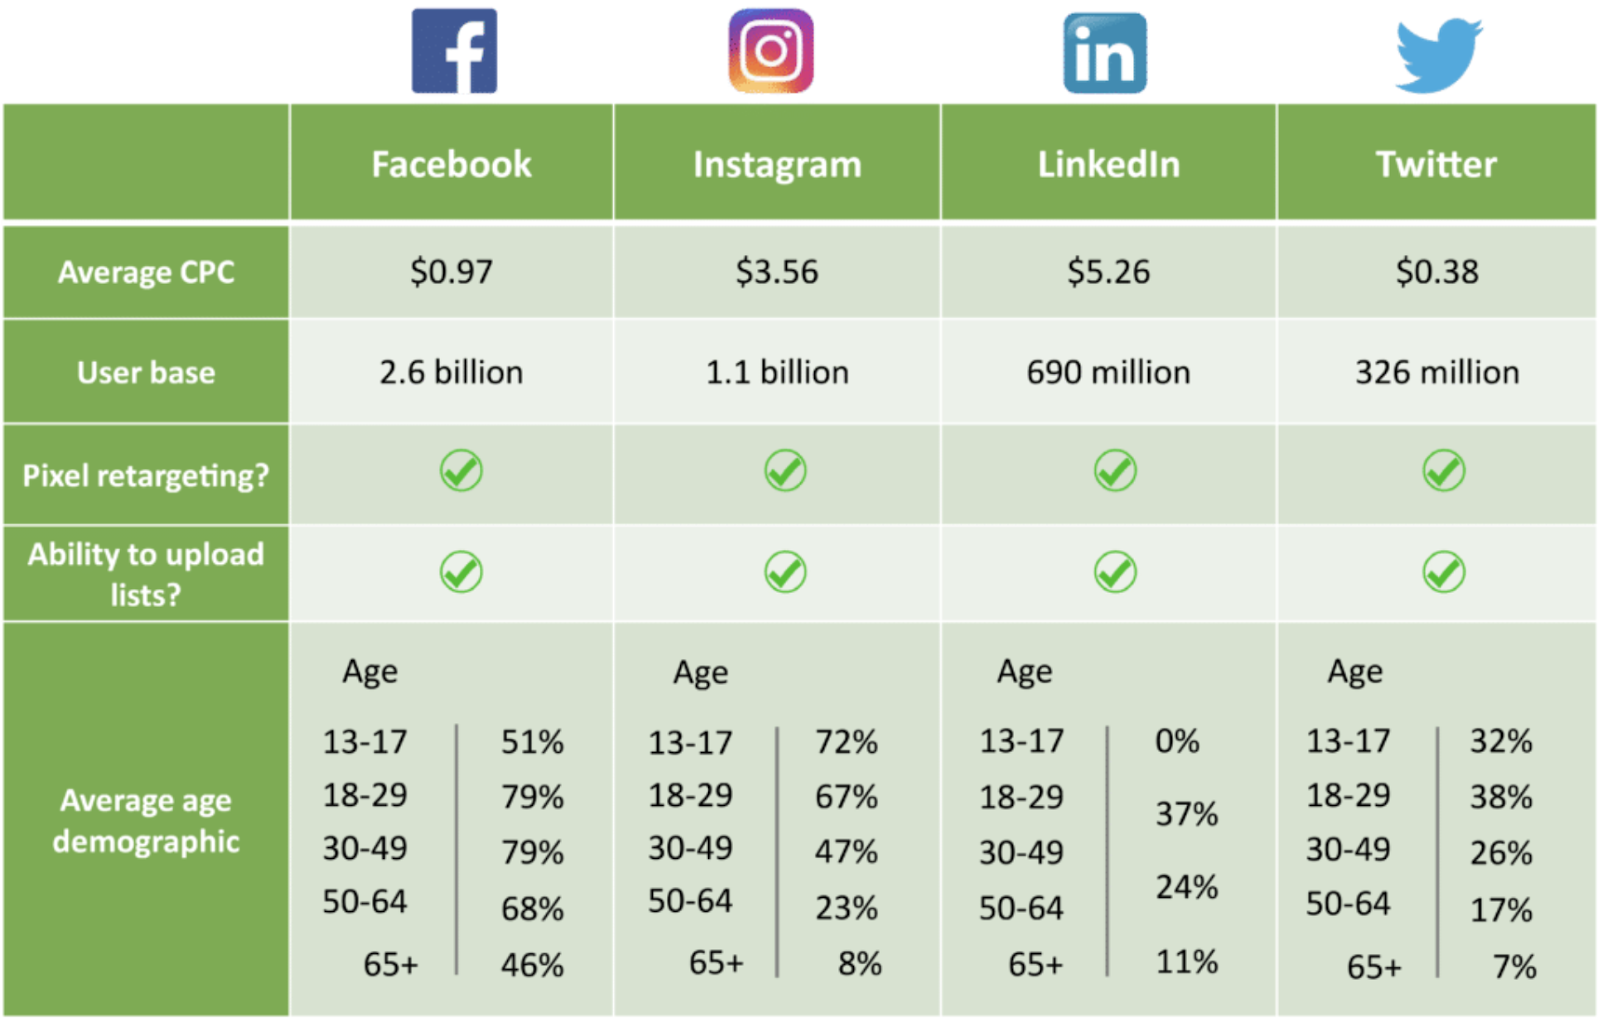 Social media comparison table by Average CPC, user base, pixel retargeting, list uploads, and age distribution